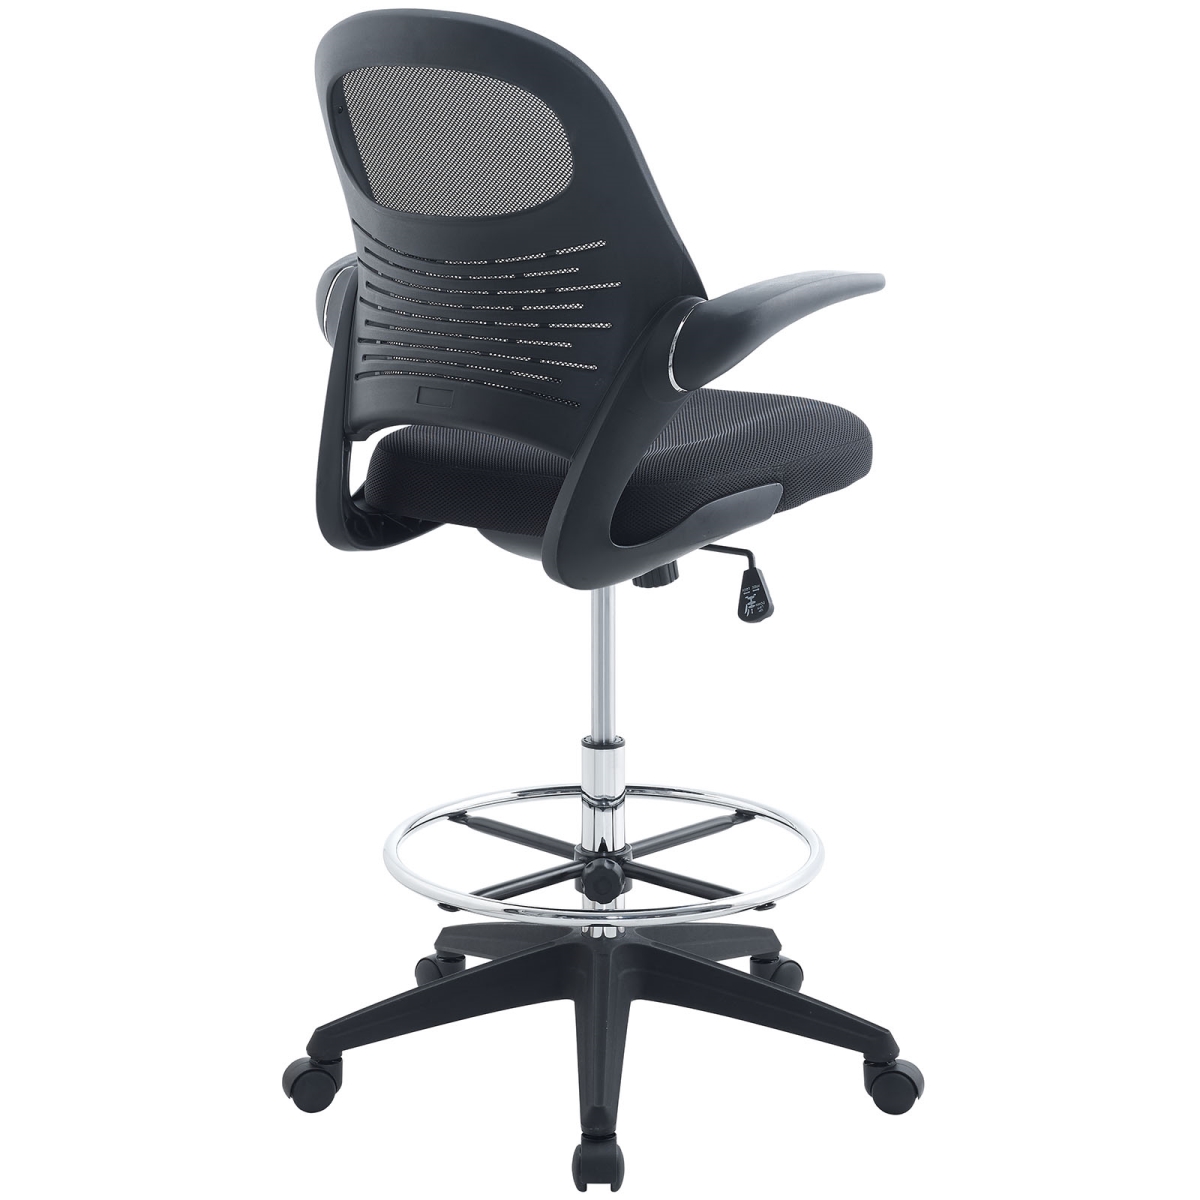 Modway Eei-2290-blk 42 H X 27.5 W X 26.5 L In. Advance Drafting Chair, Black